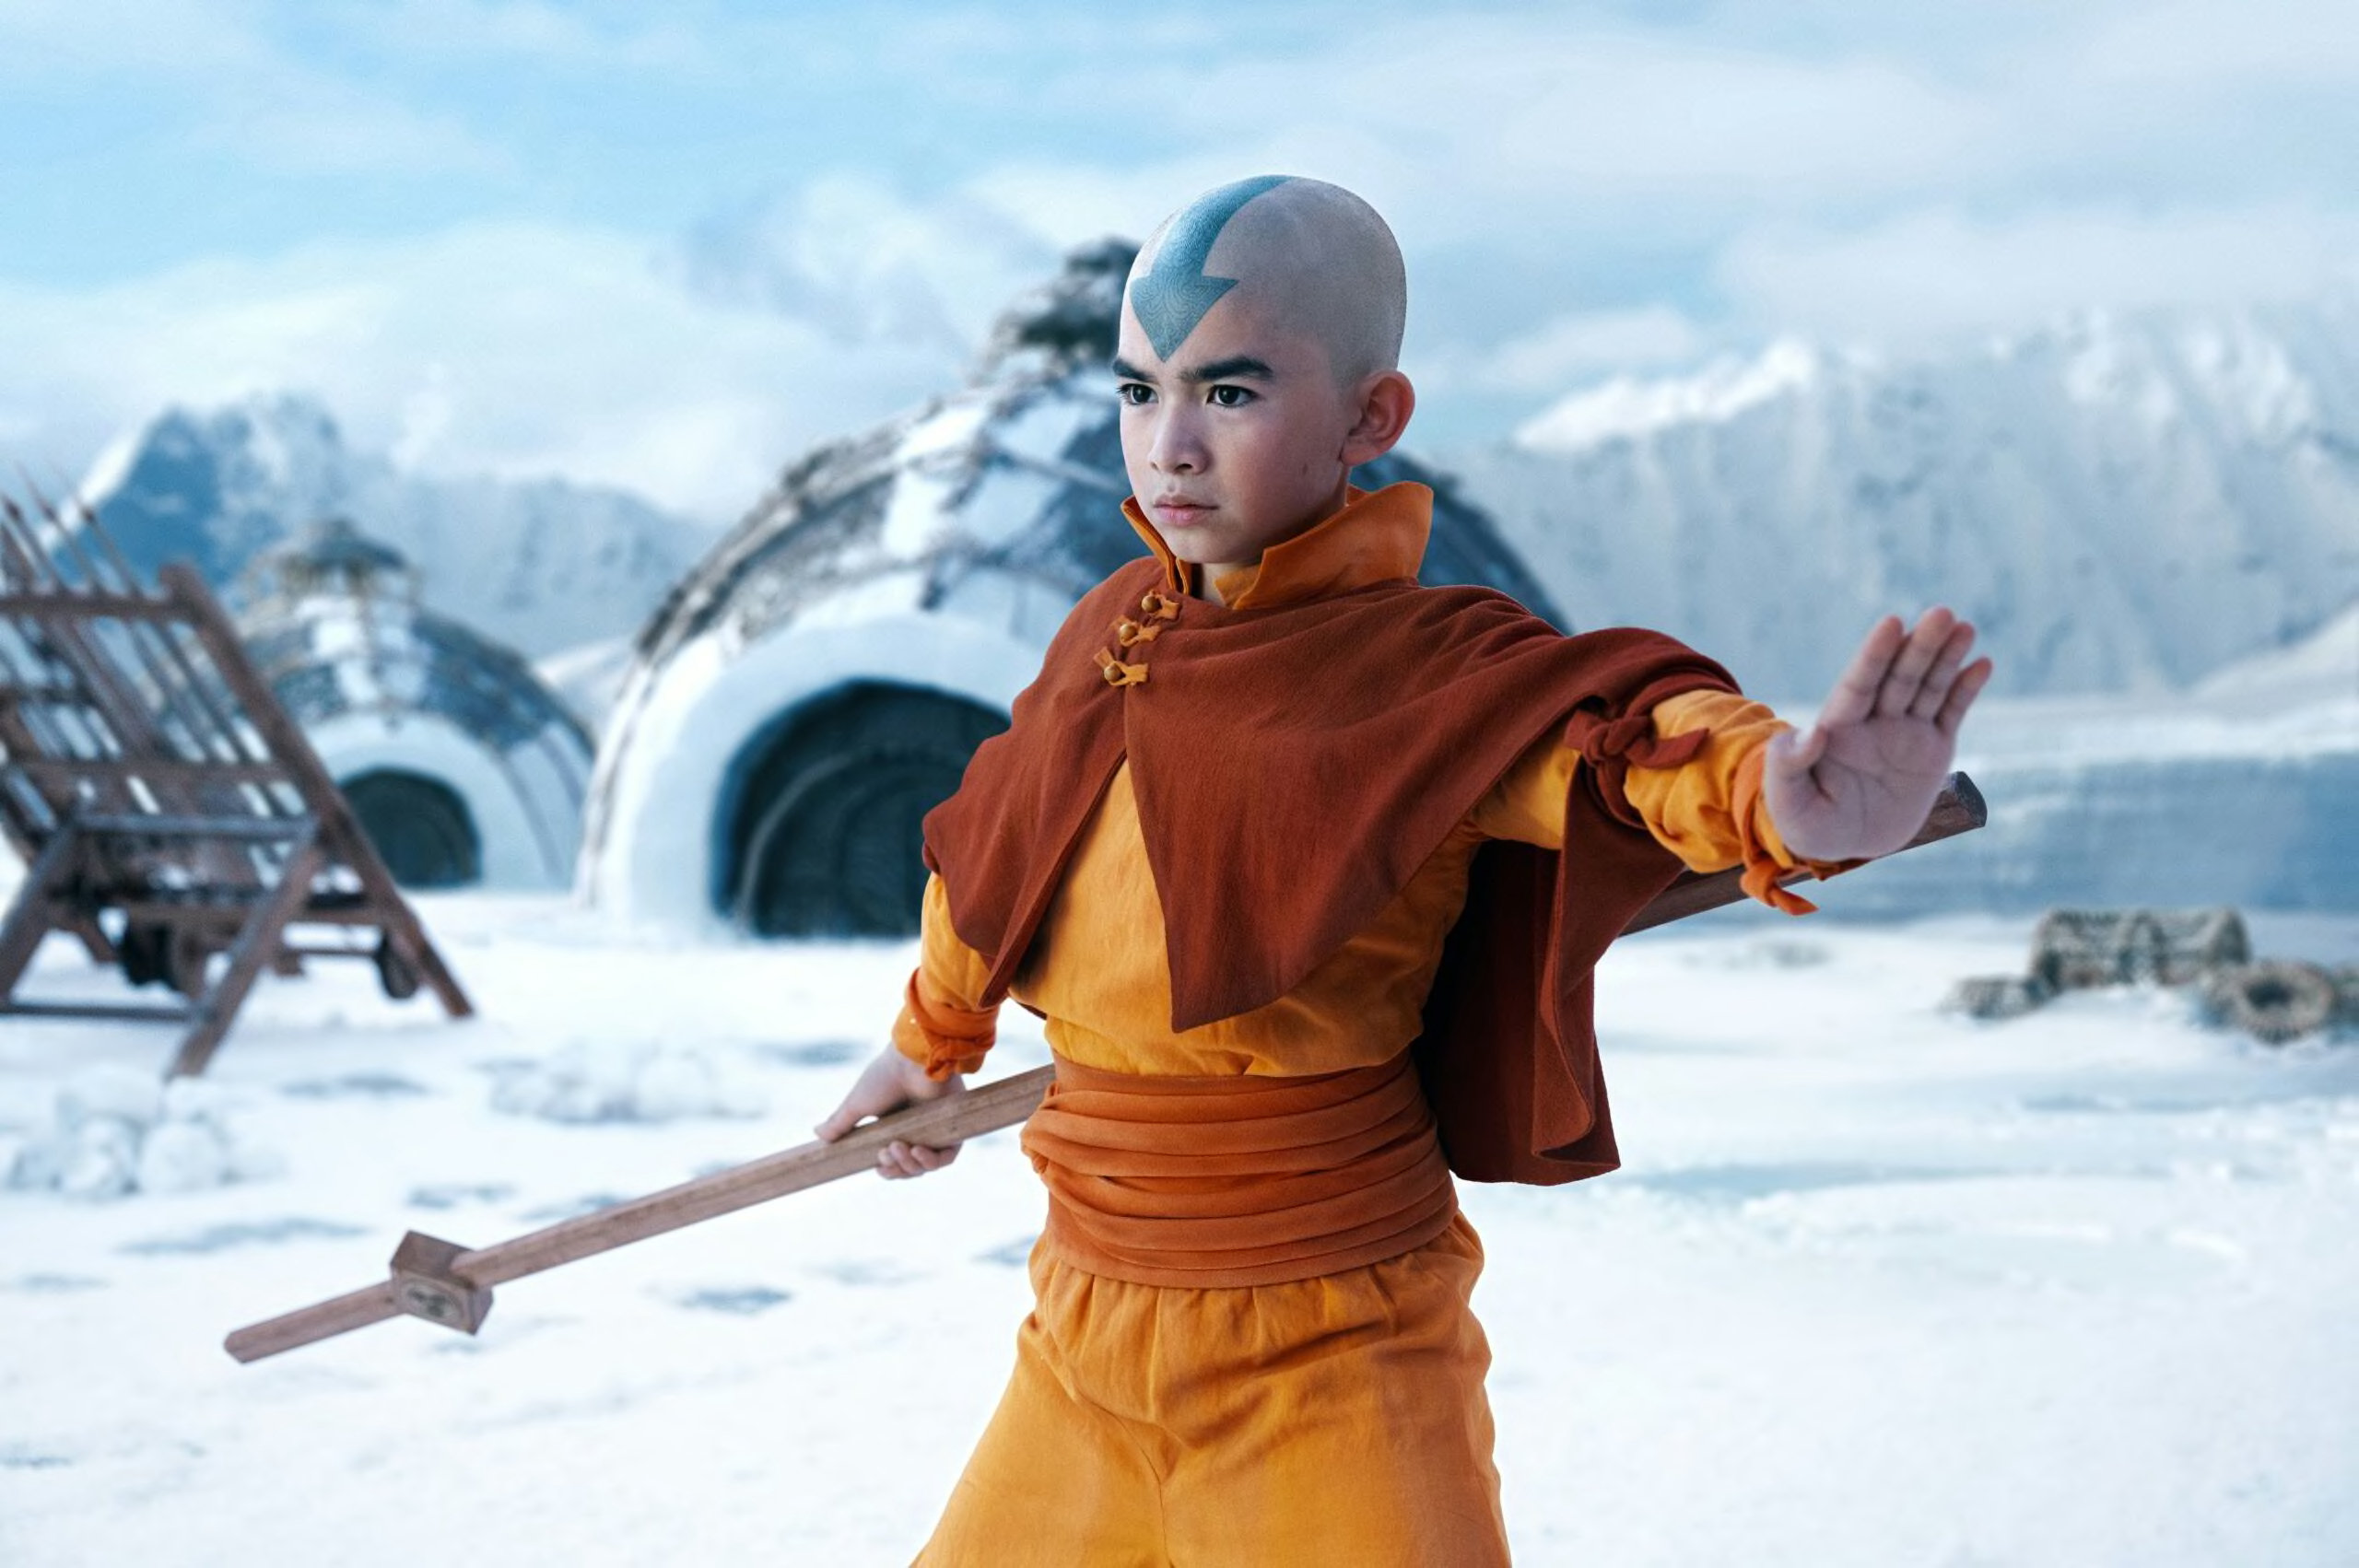 Avatar The Last Airbender Unaired Pilot Differences